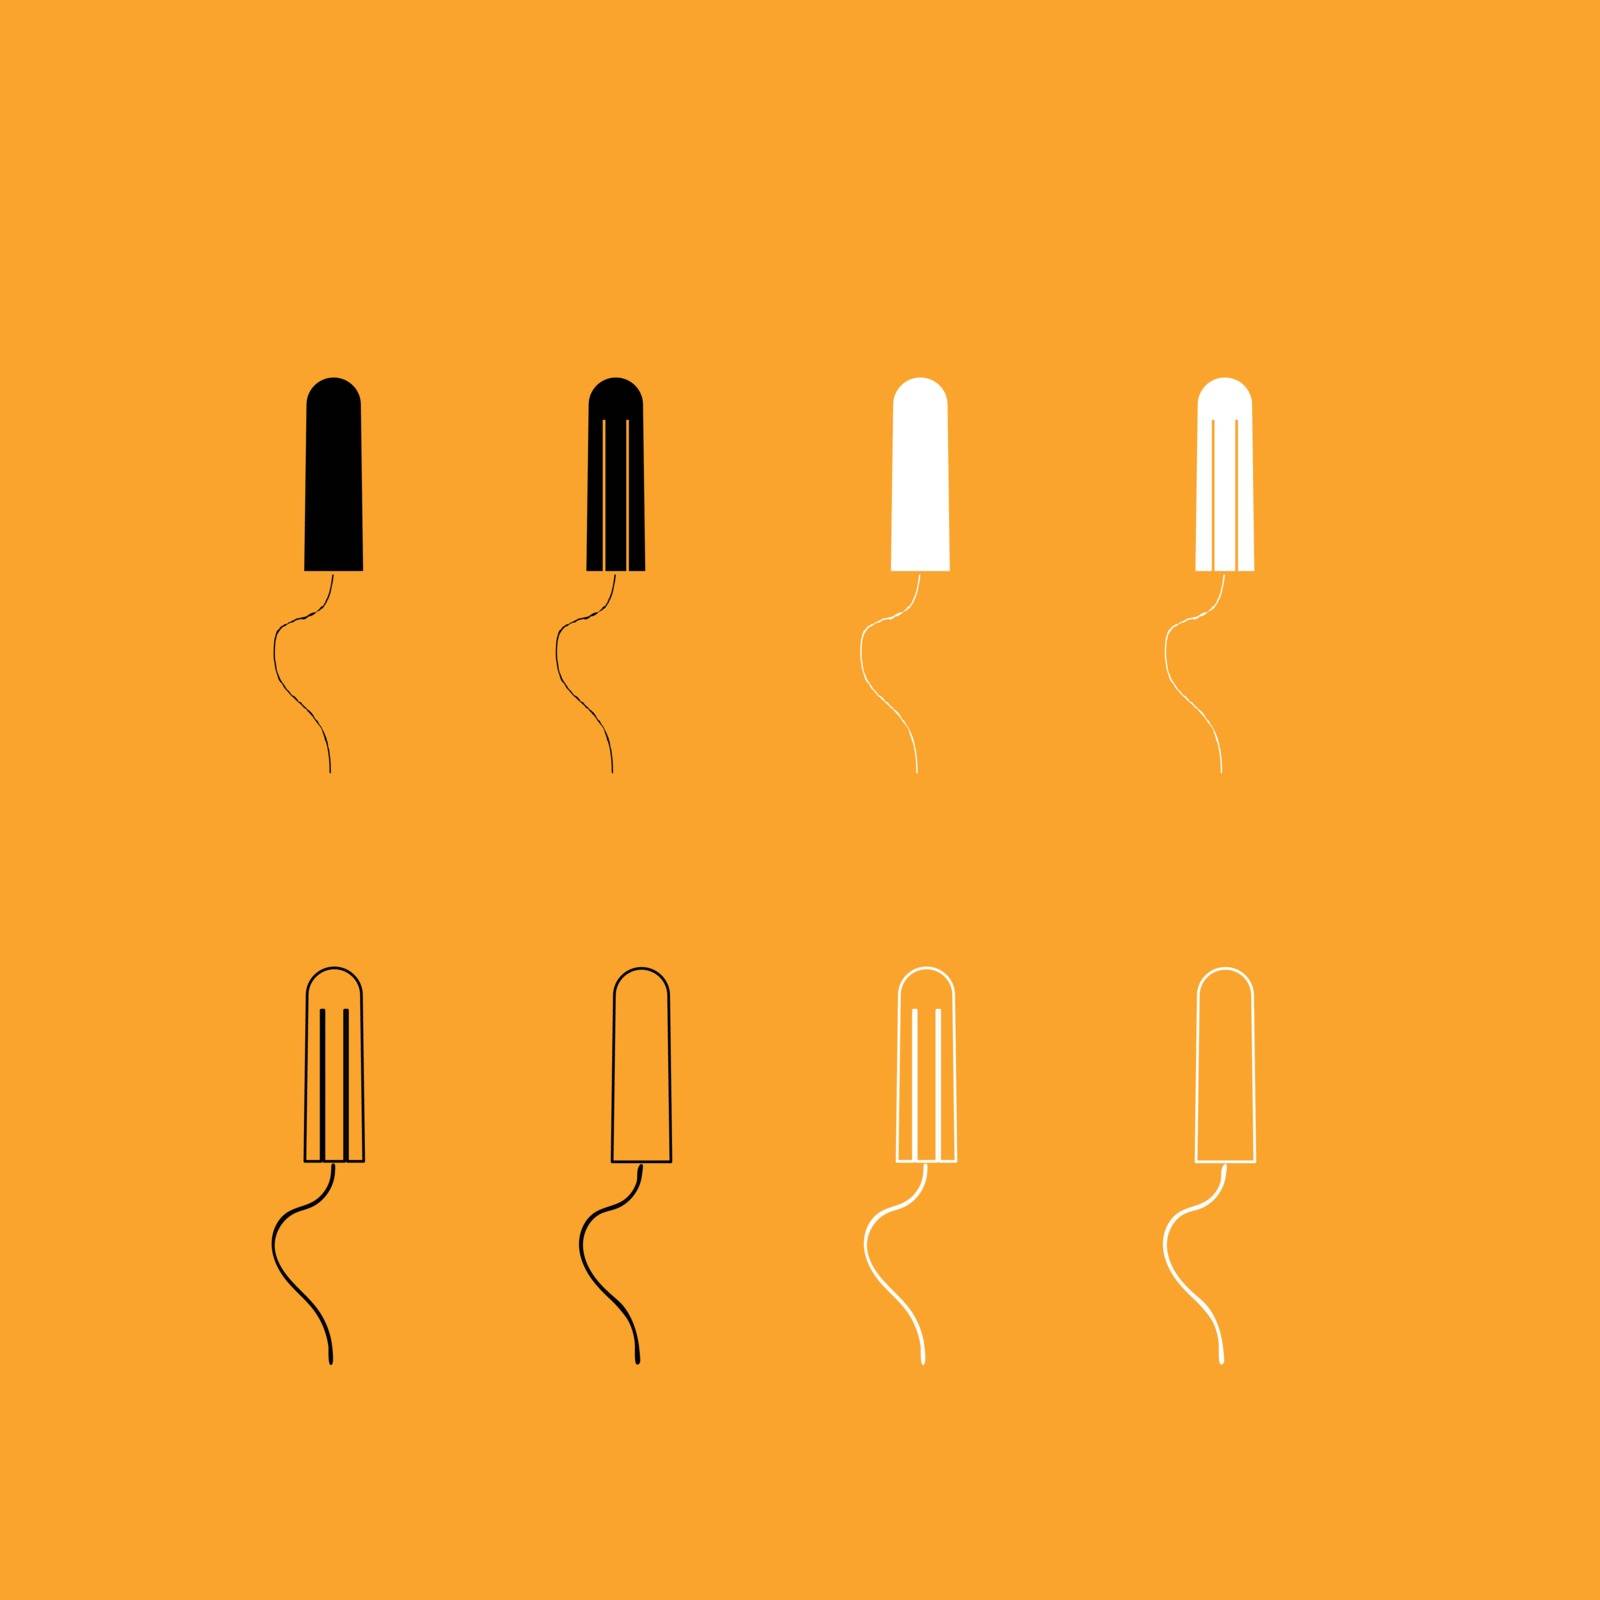 Women hygiene tampons it is set black and white icon .